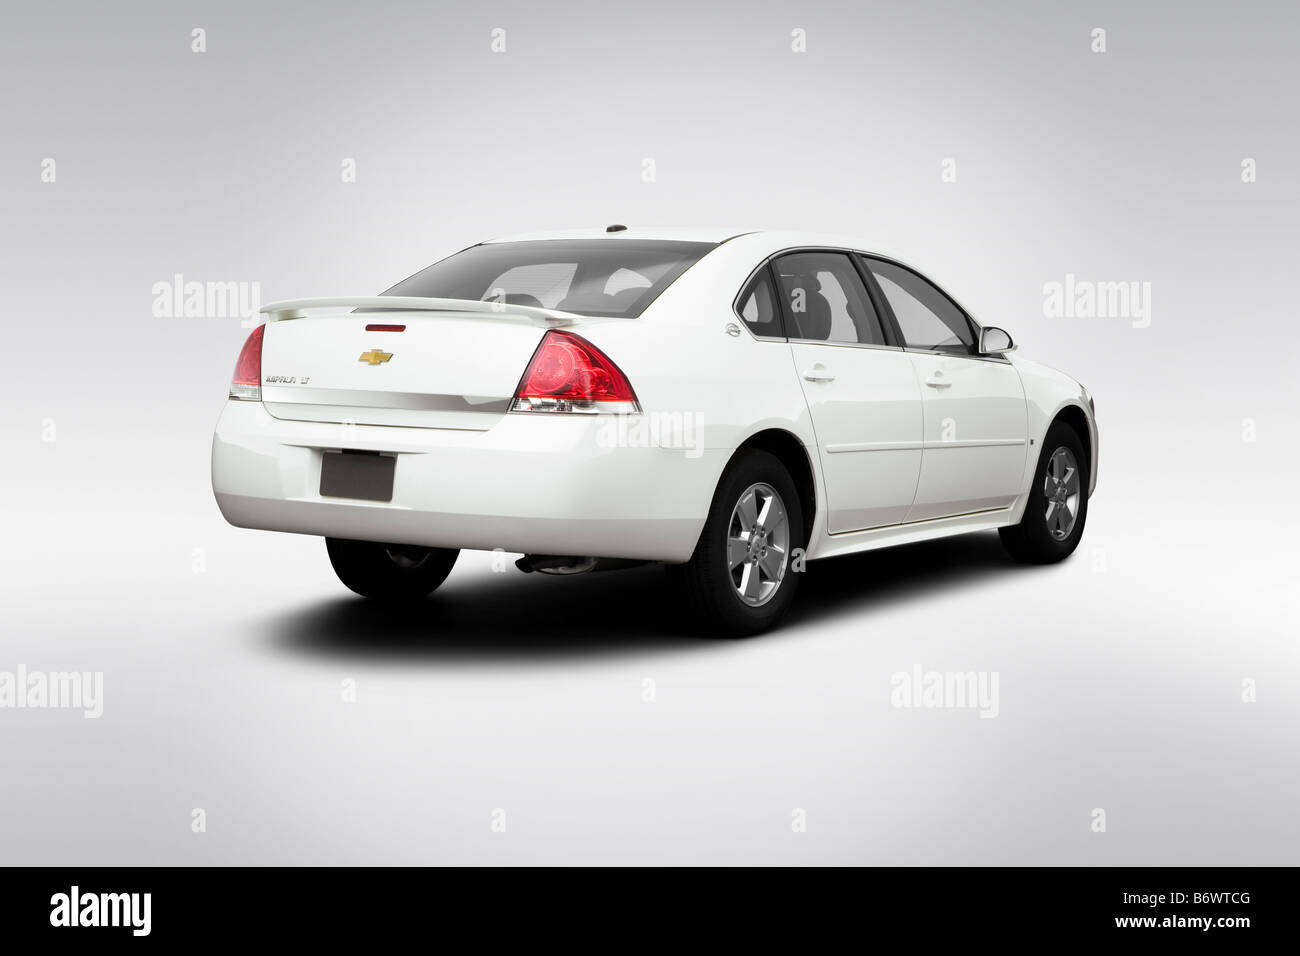 2009 Chevrolet Impala LT in White - Rear angle view Stock Photo - Alamy